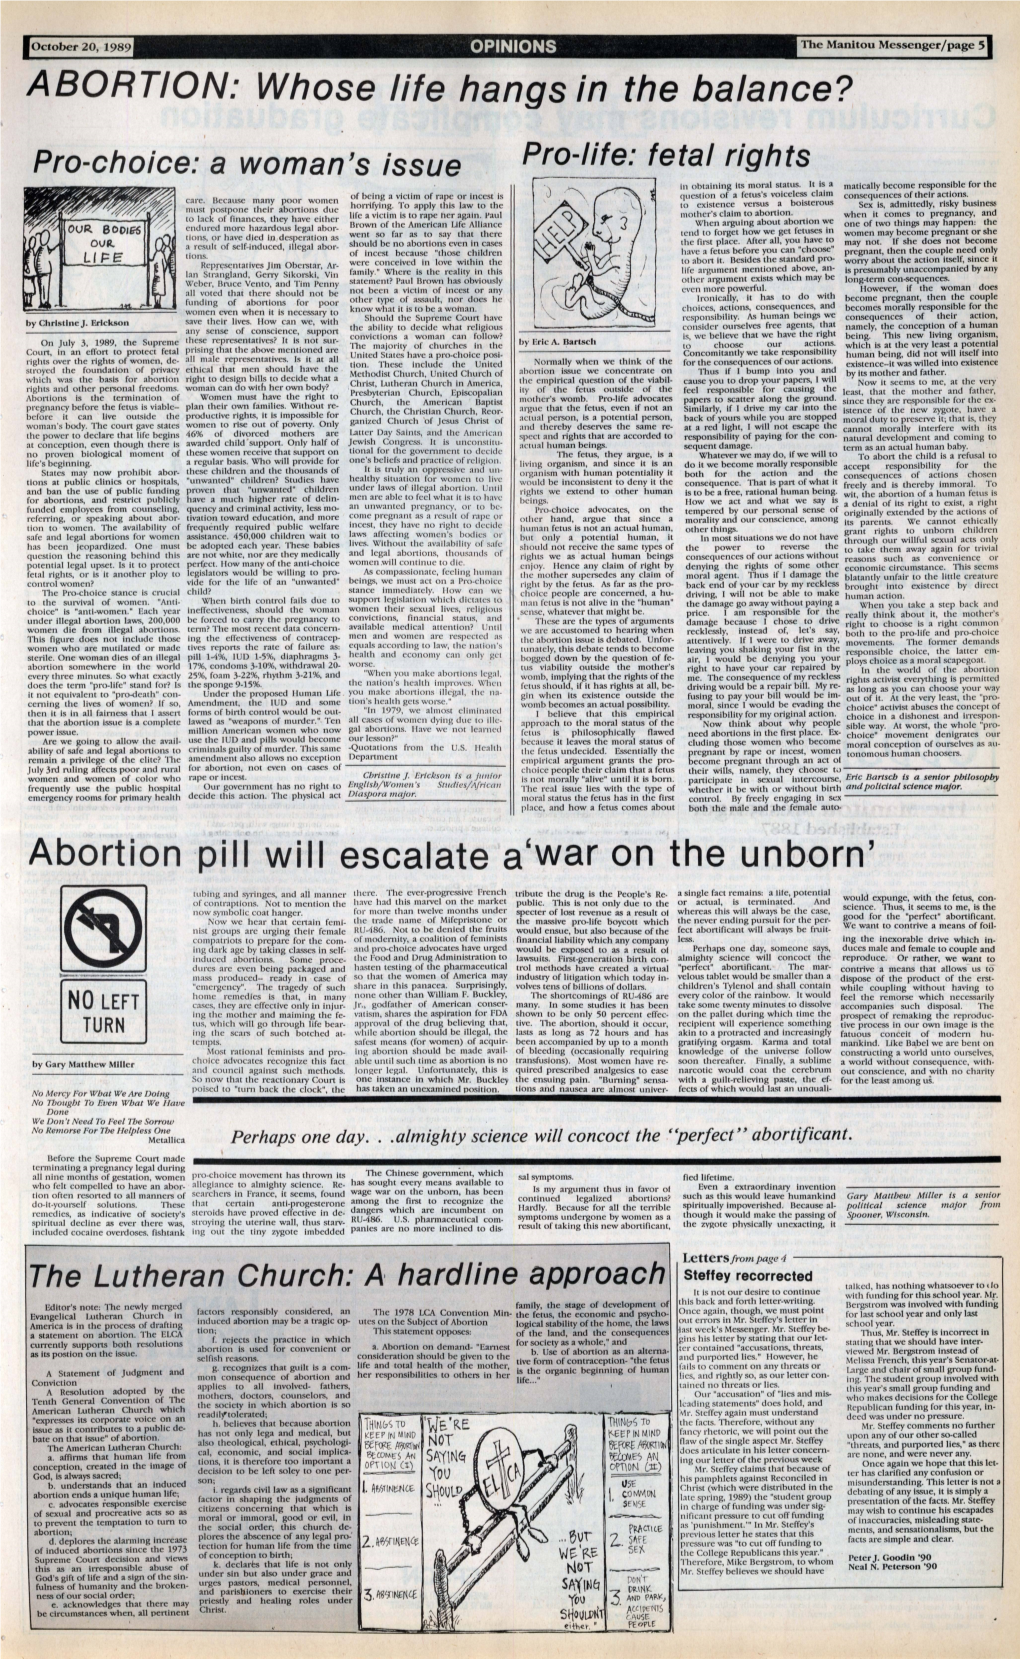 Abortion Pill Will Escalate A'war on the Unborn'